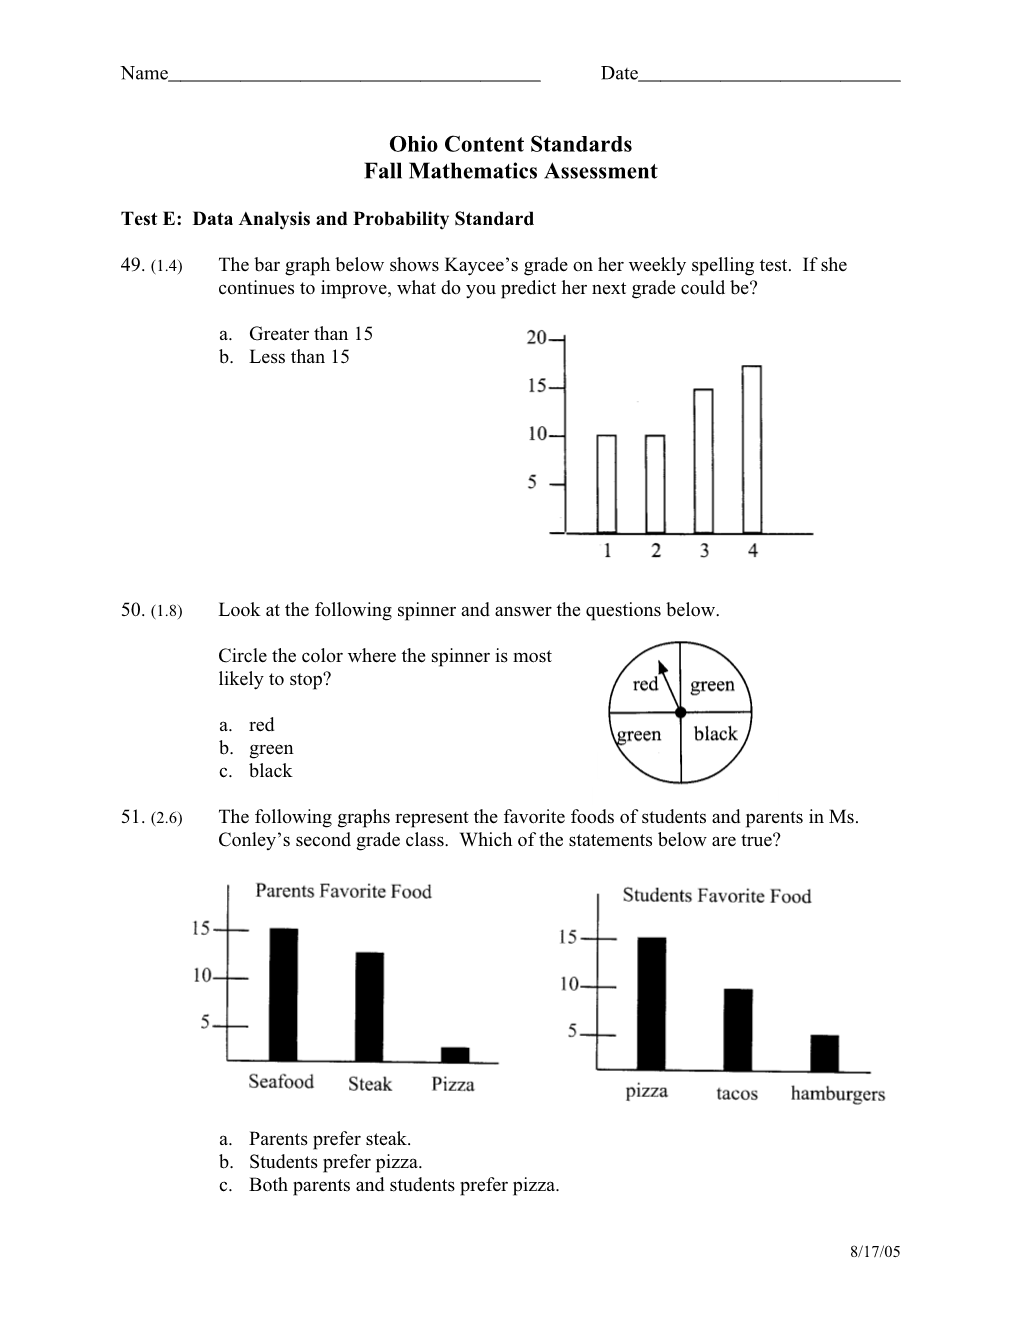 Test E: Data Analysis and Probability Standard